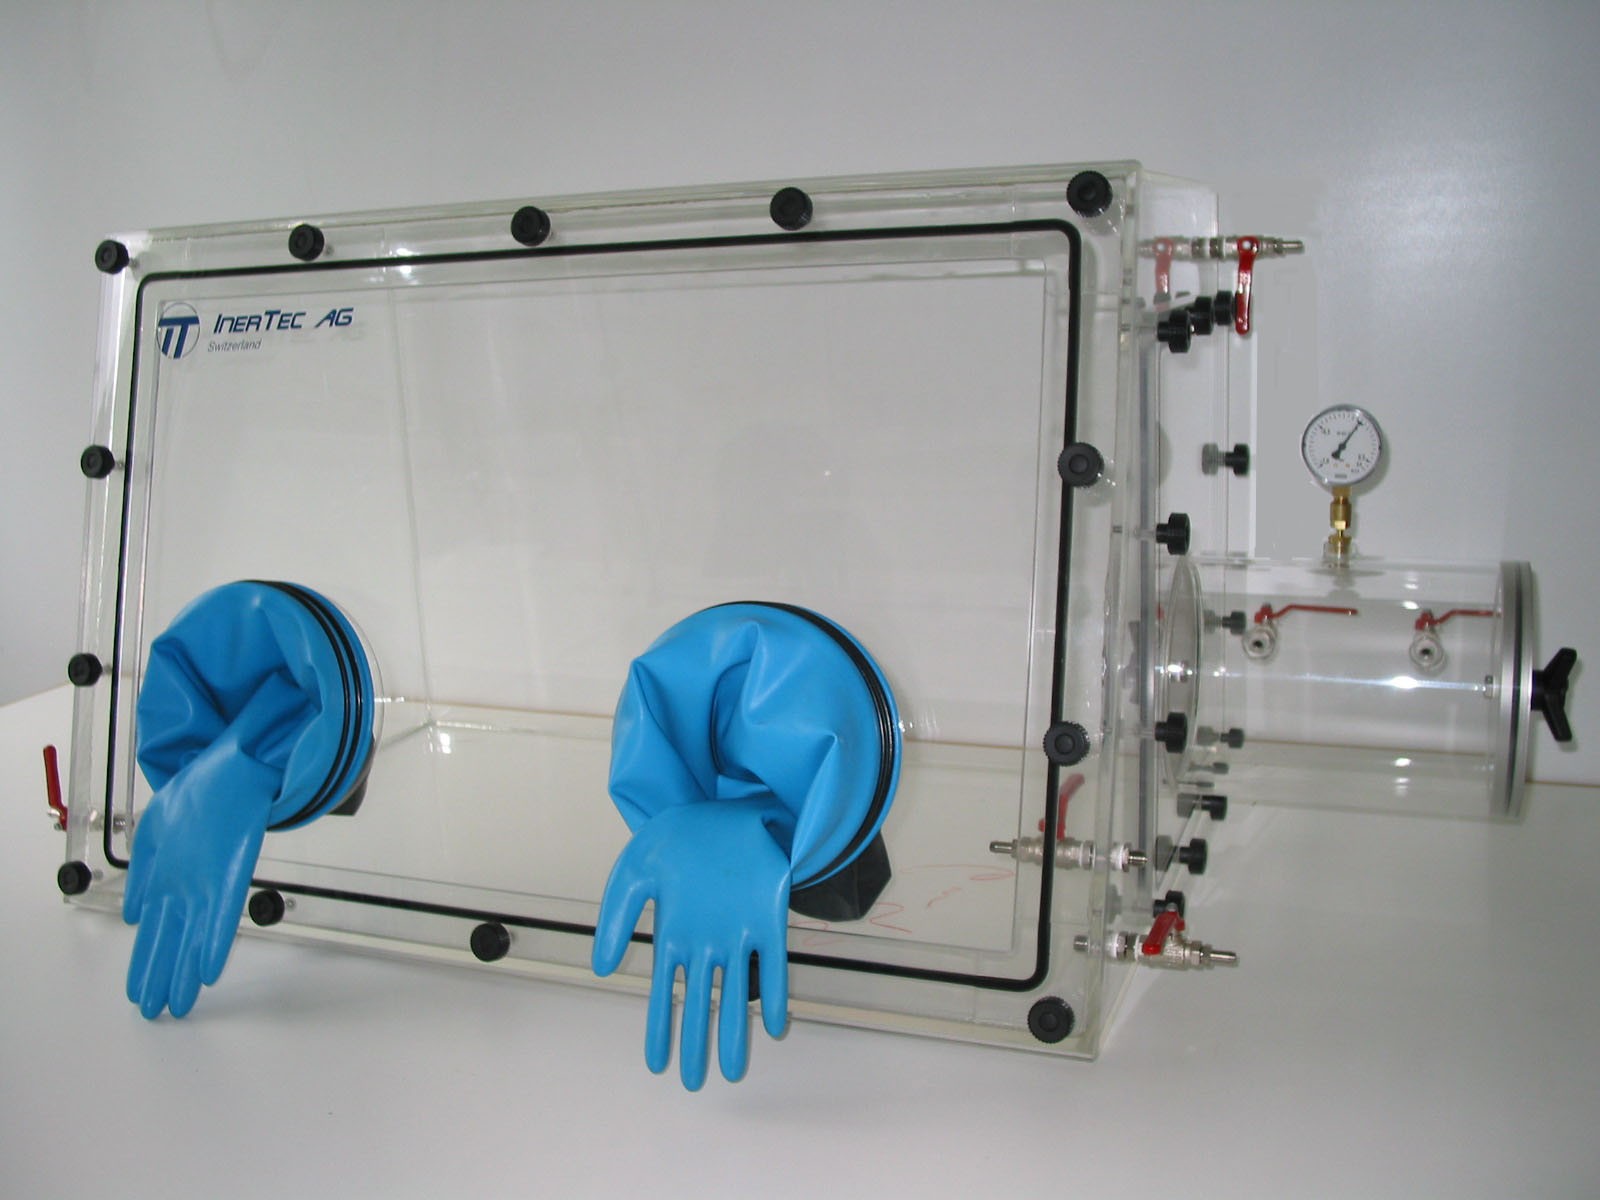 Glovebox made of acrylic &gt; Gas filling: by hand, front design: removable, side design: flange removable